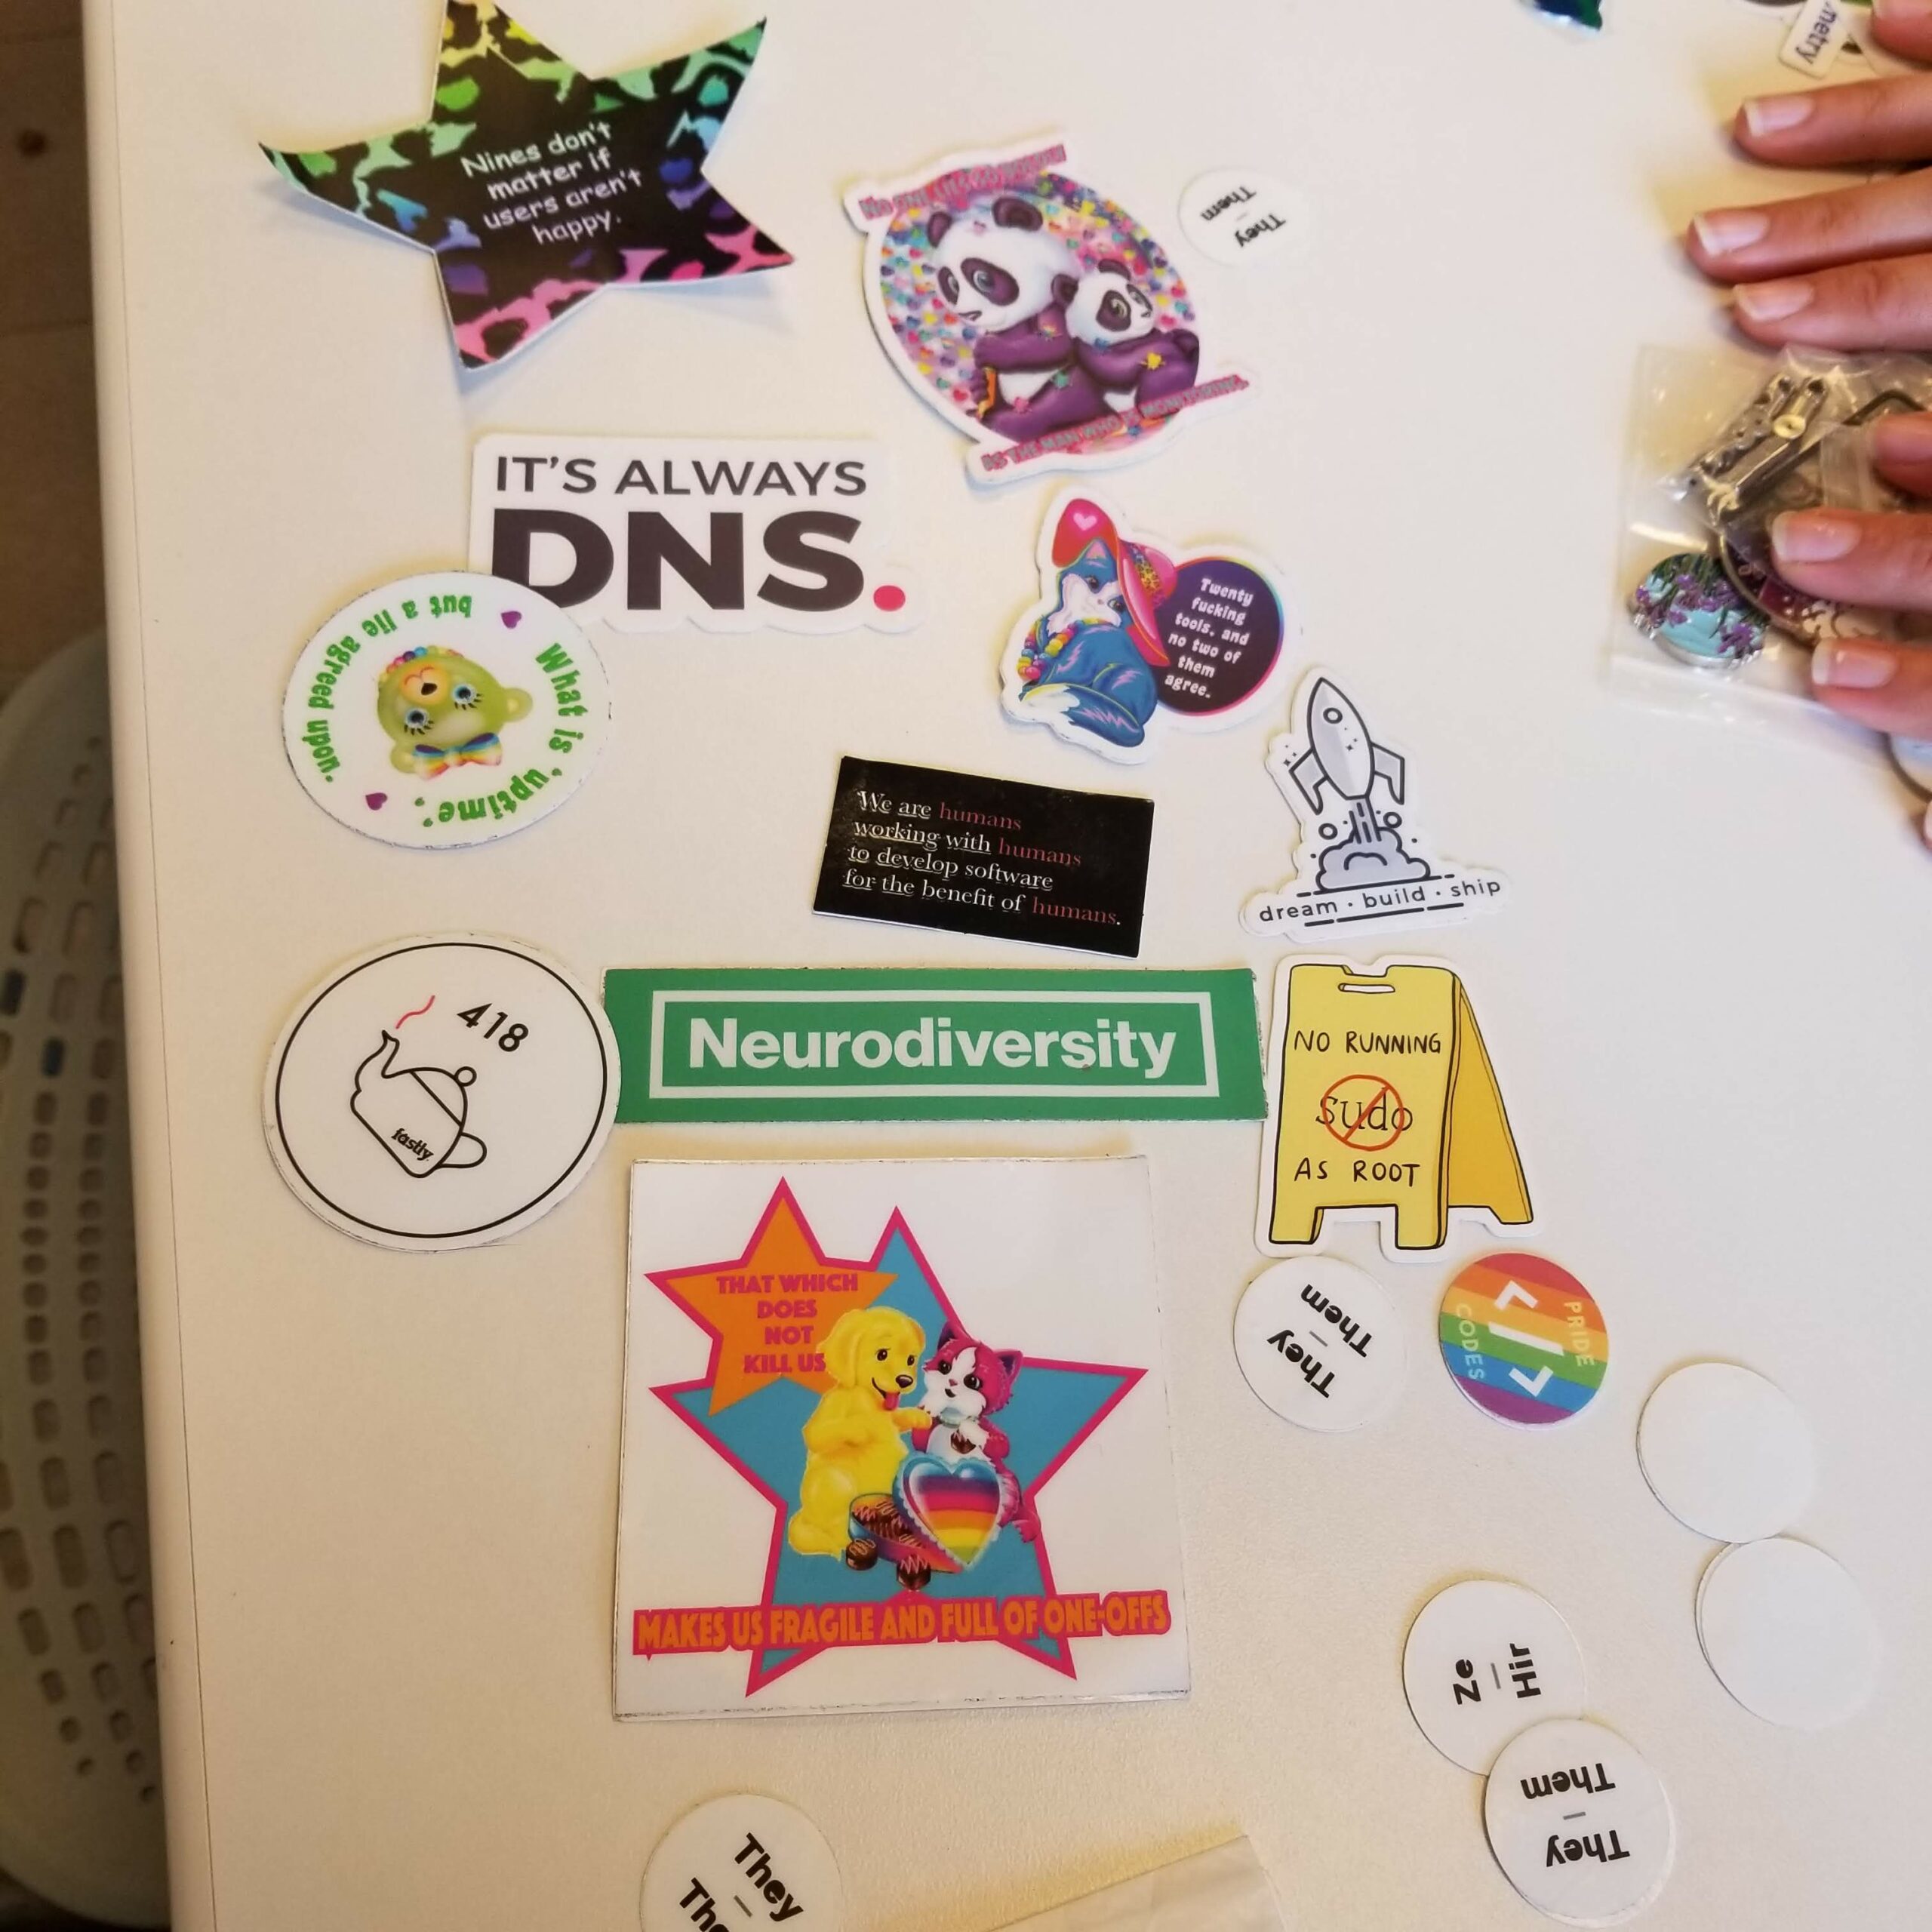 A set of stickers that I think are cool. One says "It's always DNS." Another says "Neurodiversity".